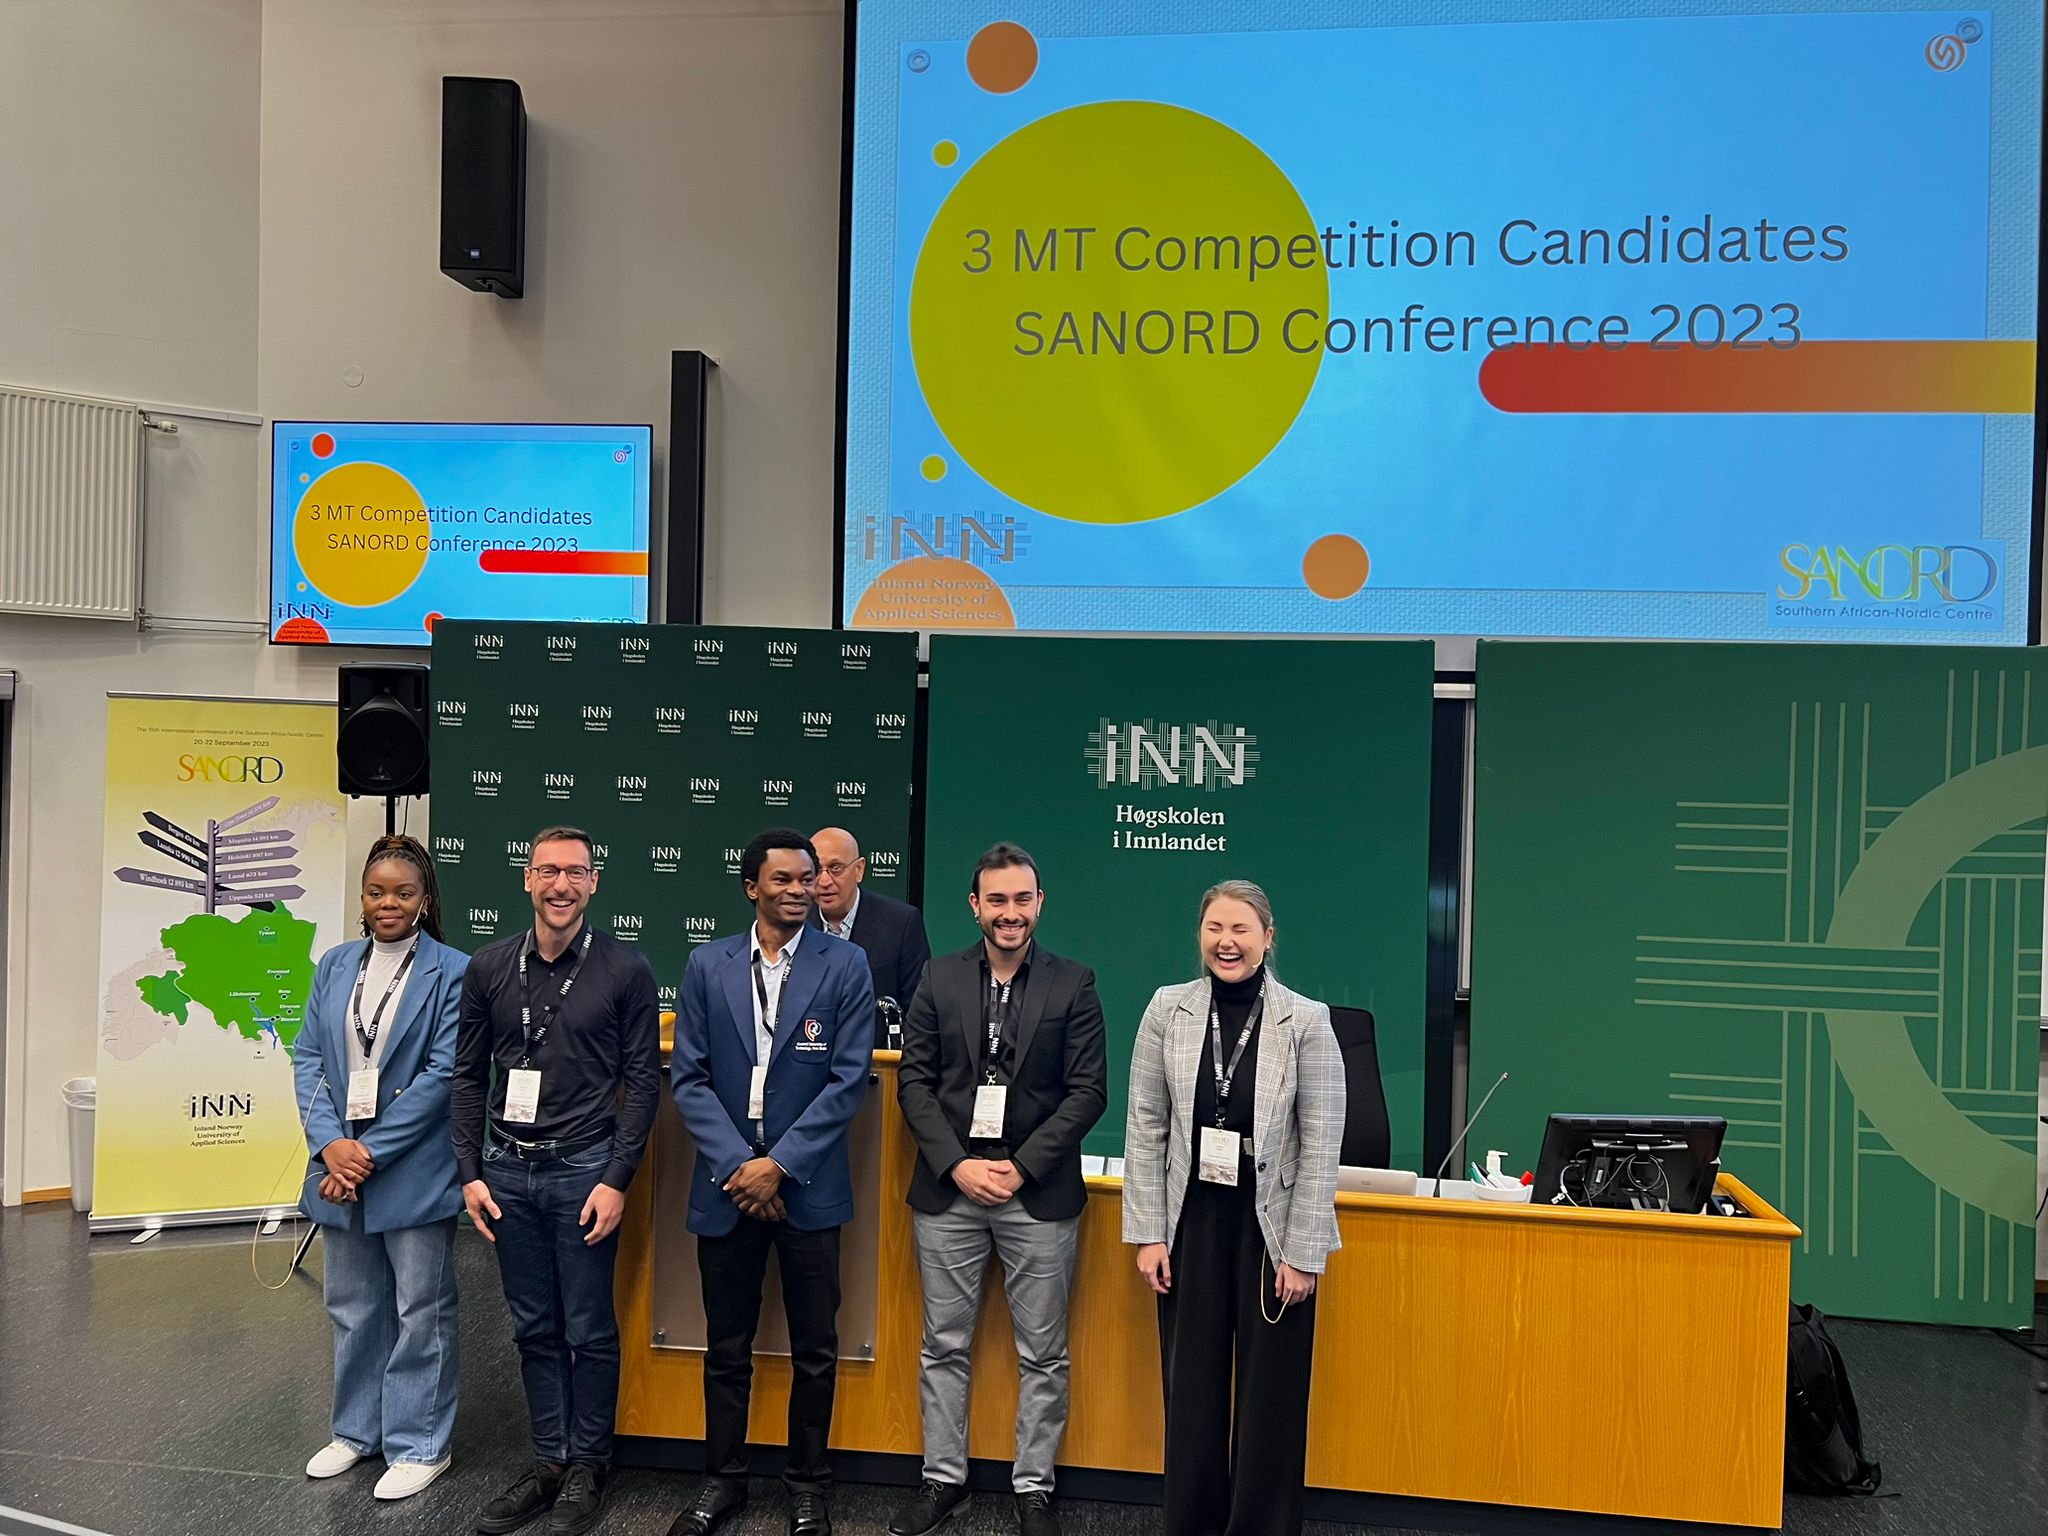 3MT competition participants at the SANORD conference